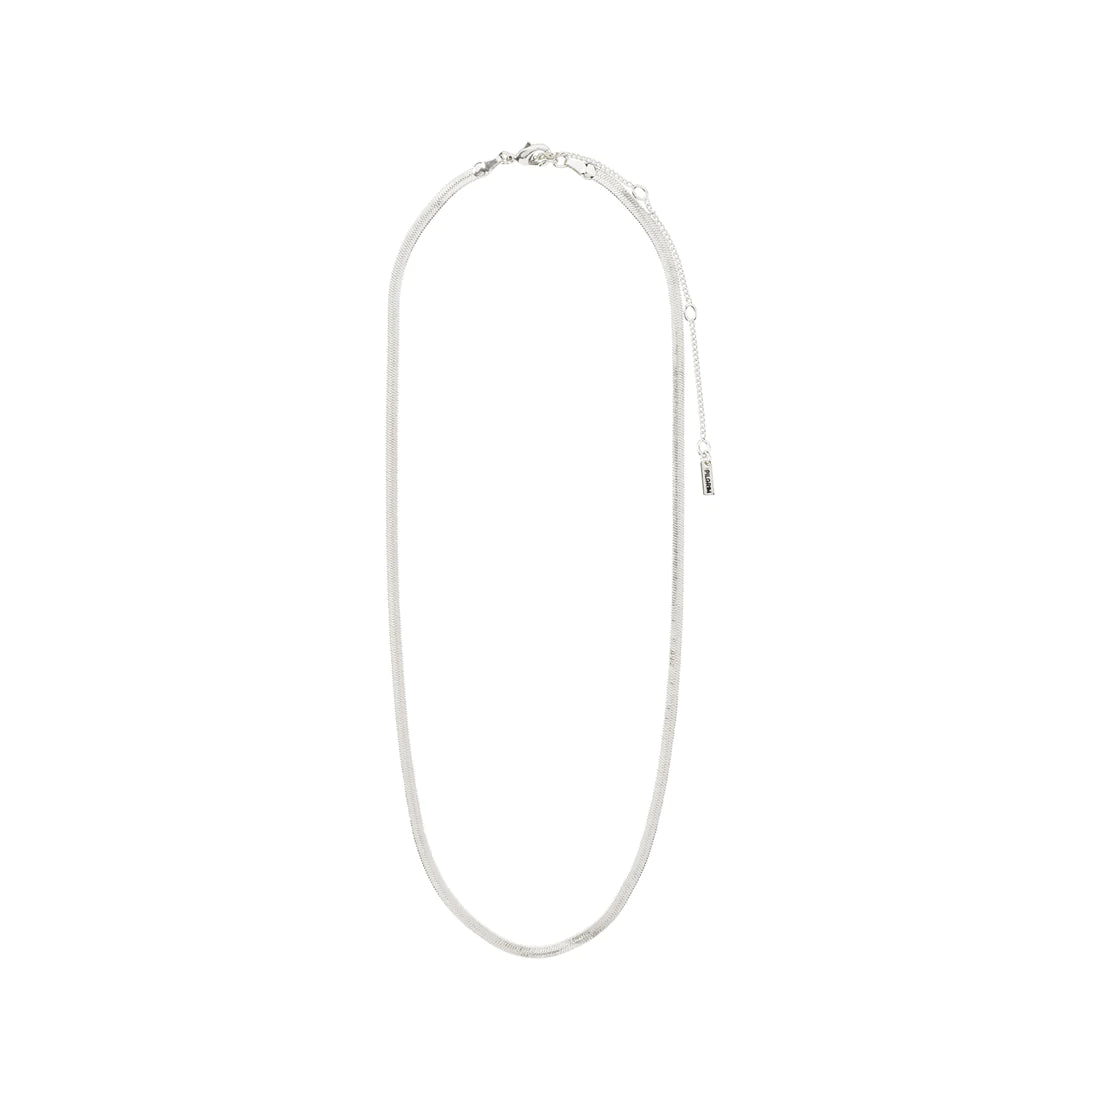 Pilgrim JOANNA Recycled Flat Snake Chain Necklace Silver-Plated